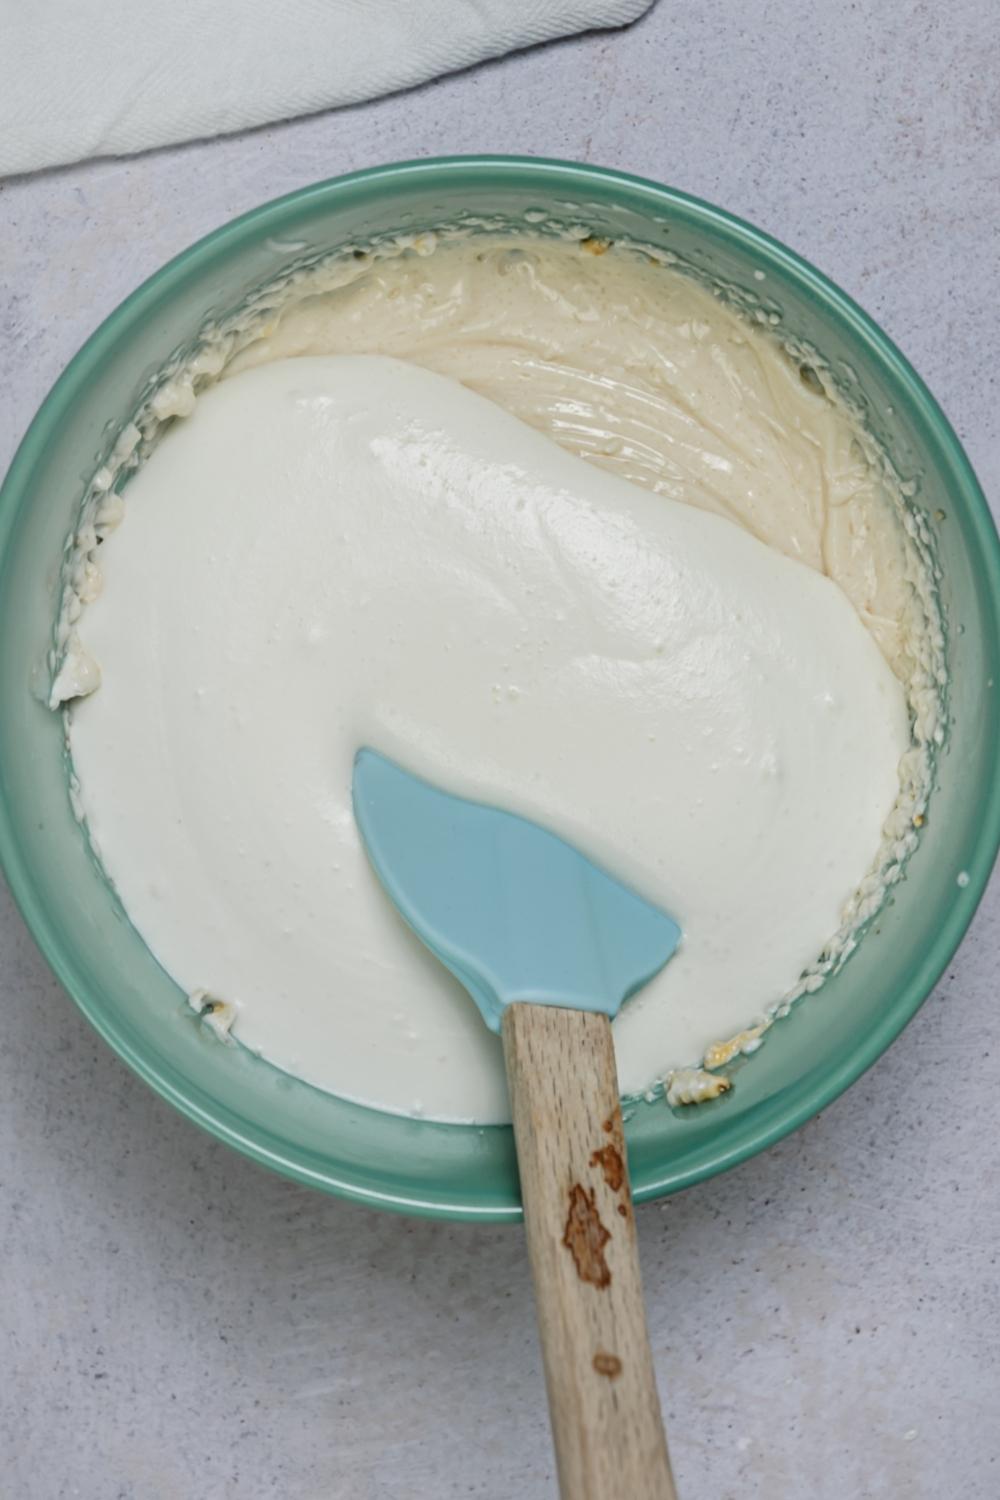 An overhead view of a mixing bowl with a creamy mixture of all the ingredients and cool whip on top. A rubber spatula sits in the bowl.